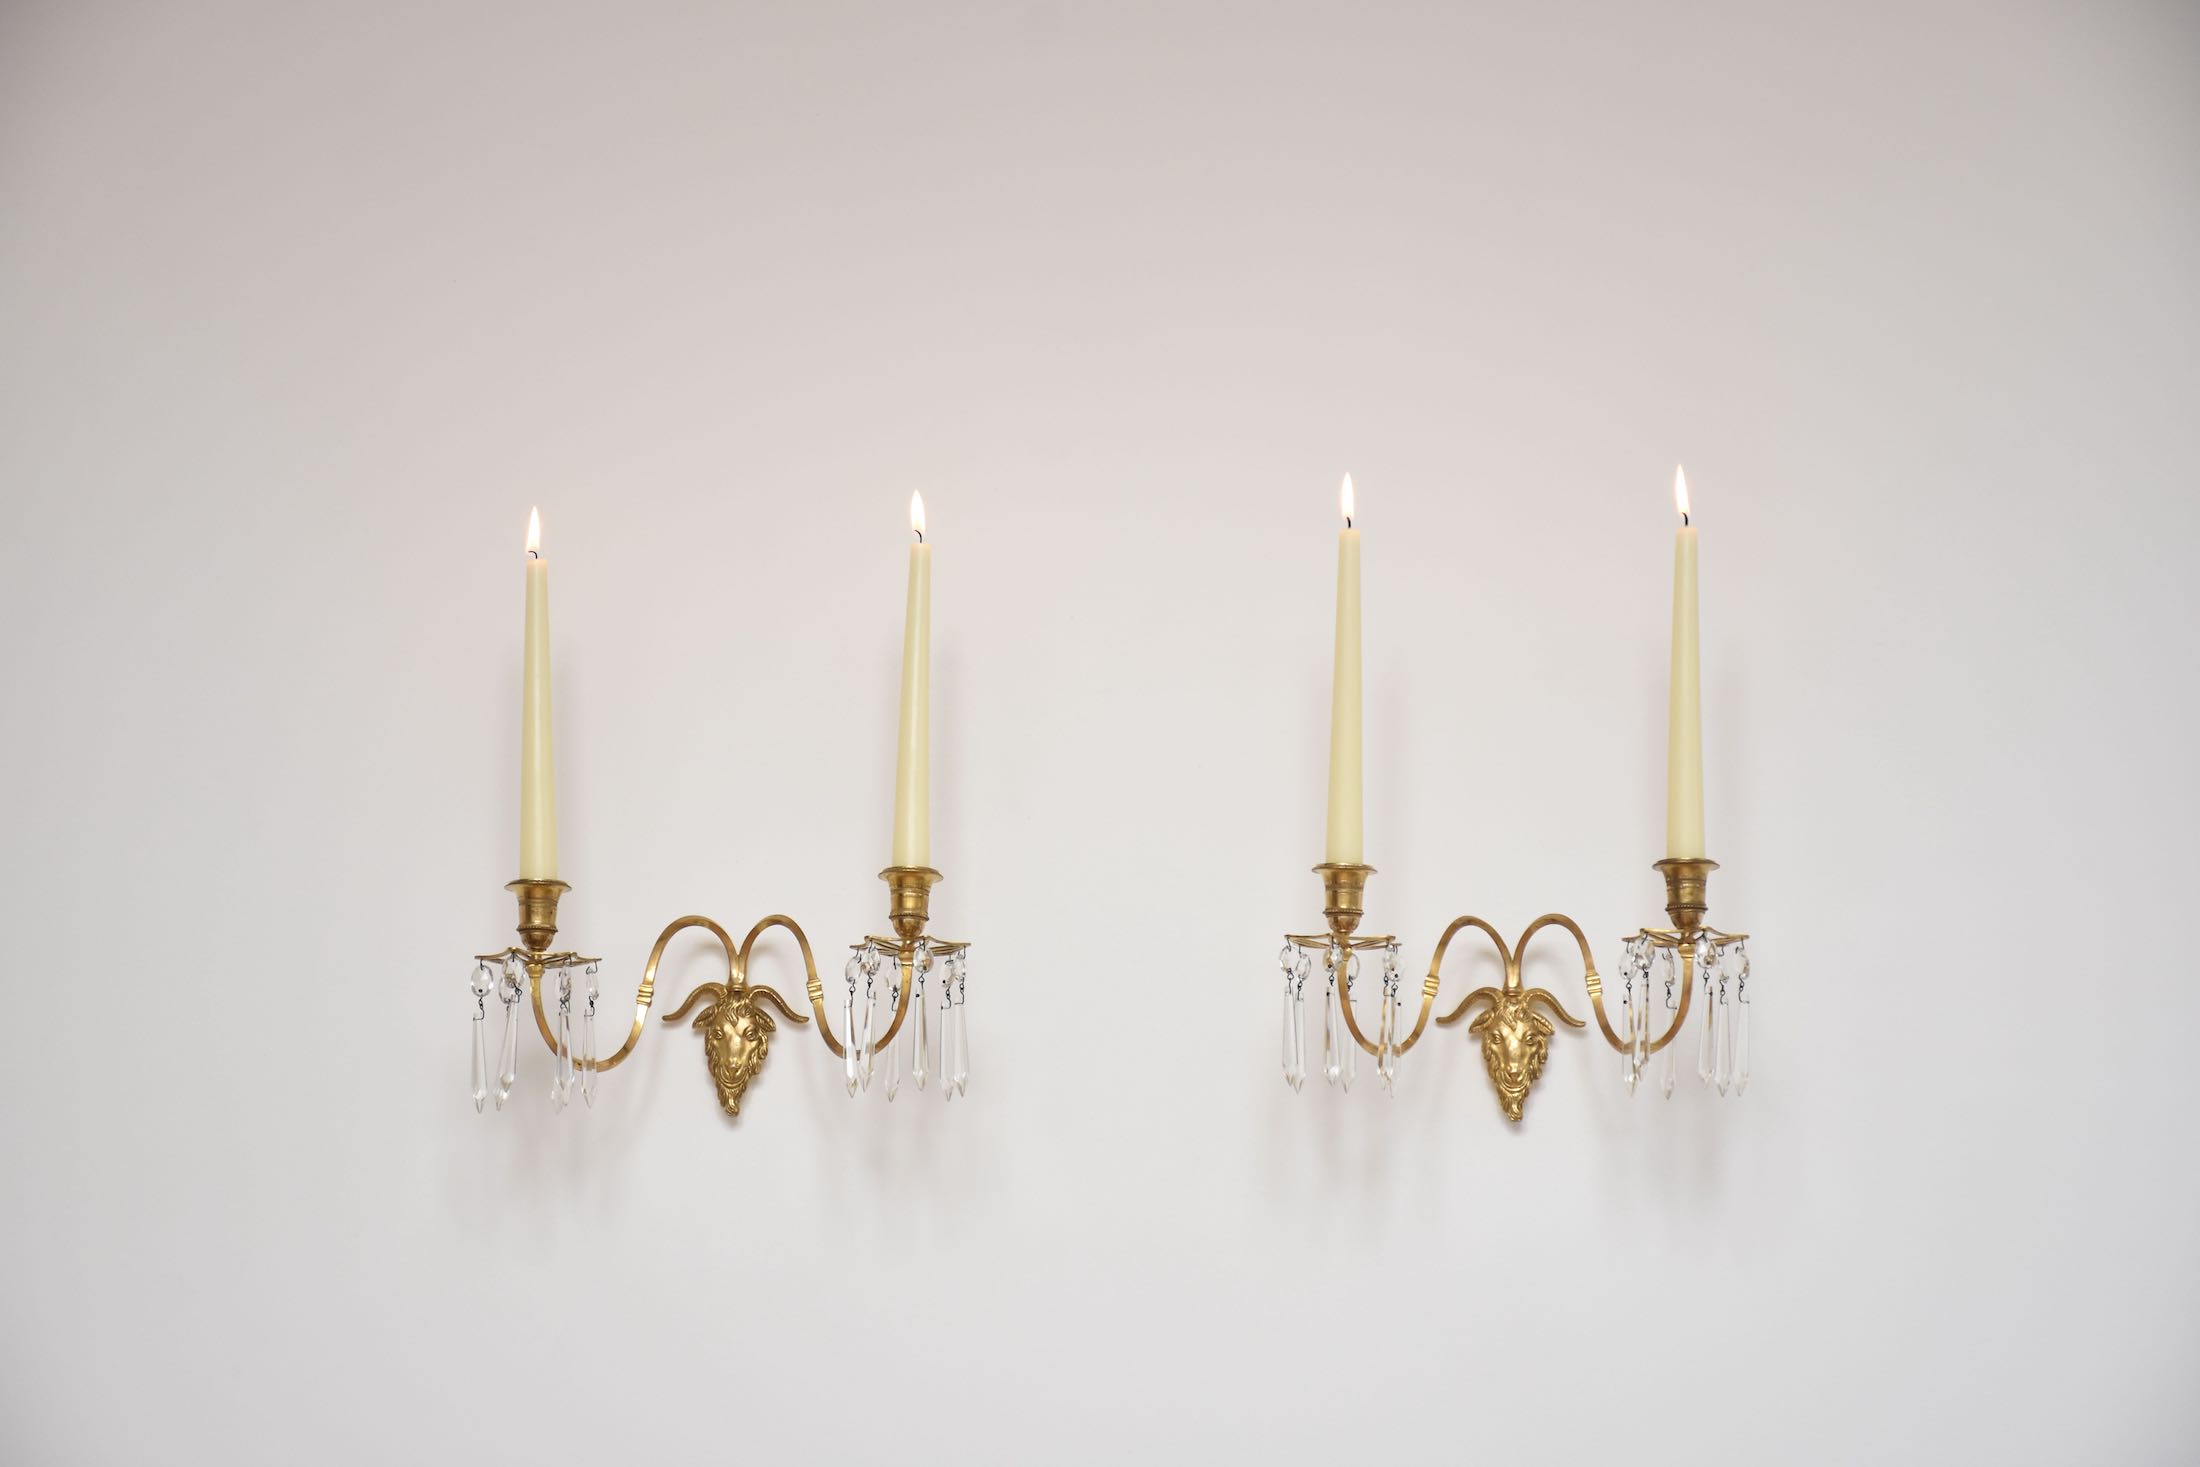 A pair of 19th c. gilt bronze wall sconces